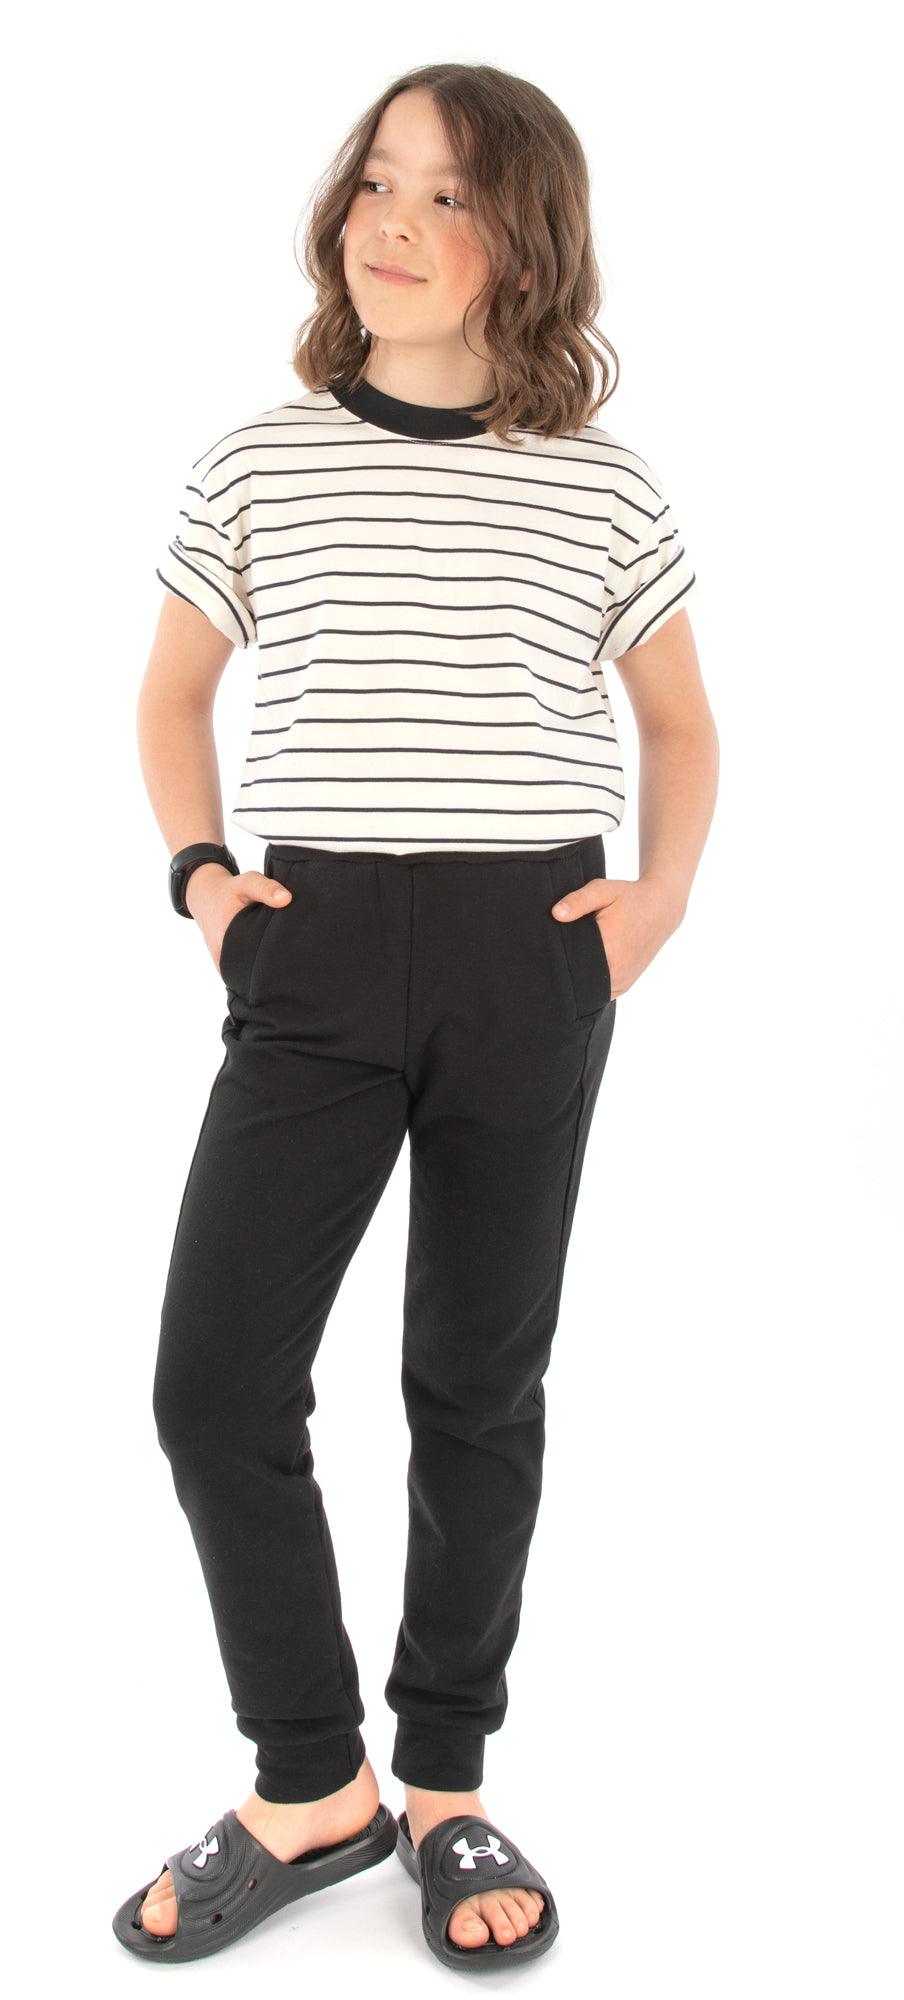 Zoom joggers in size M (9) in French terry, with a Laurent t-shirt